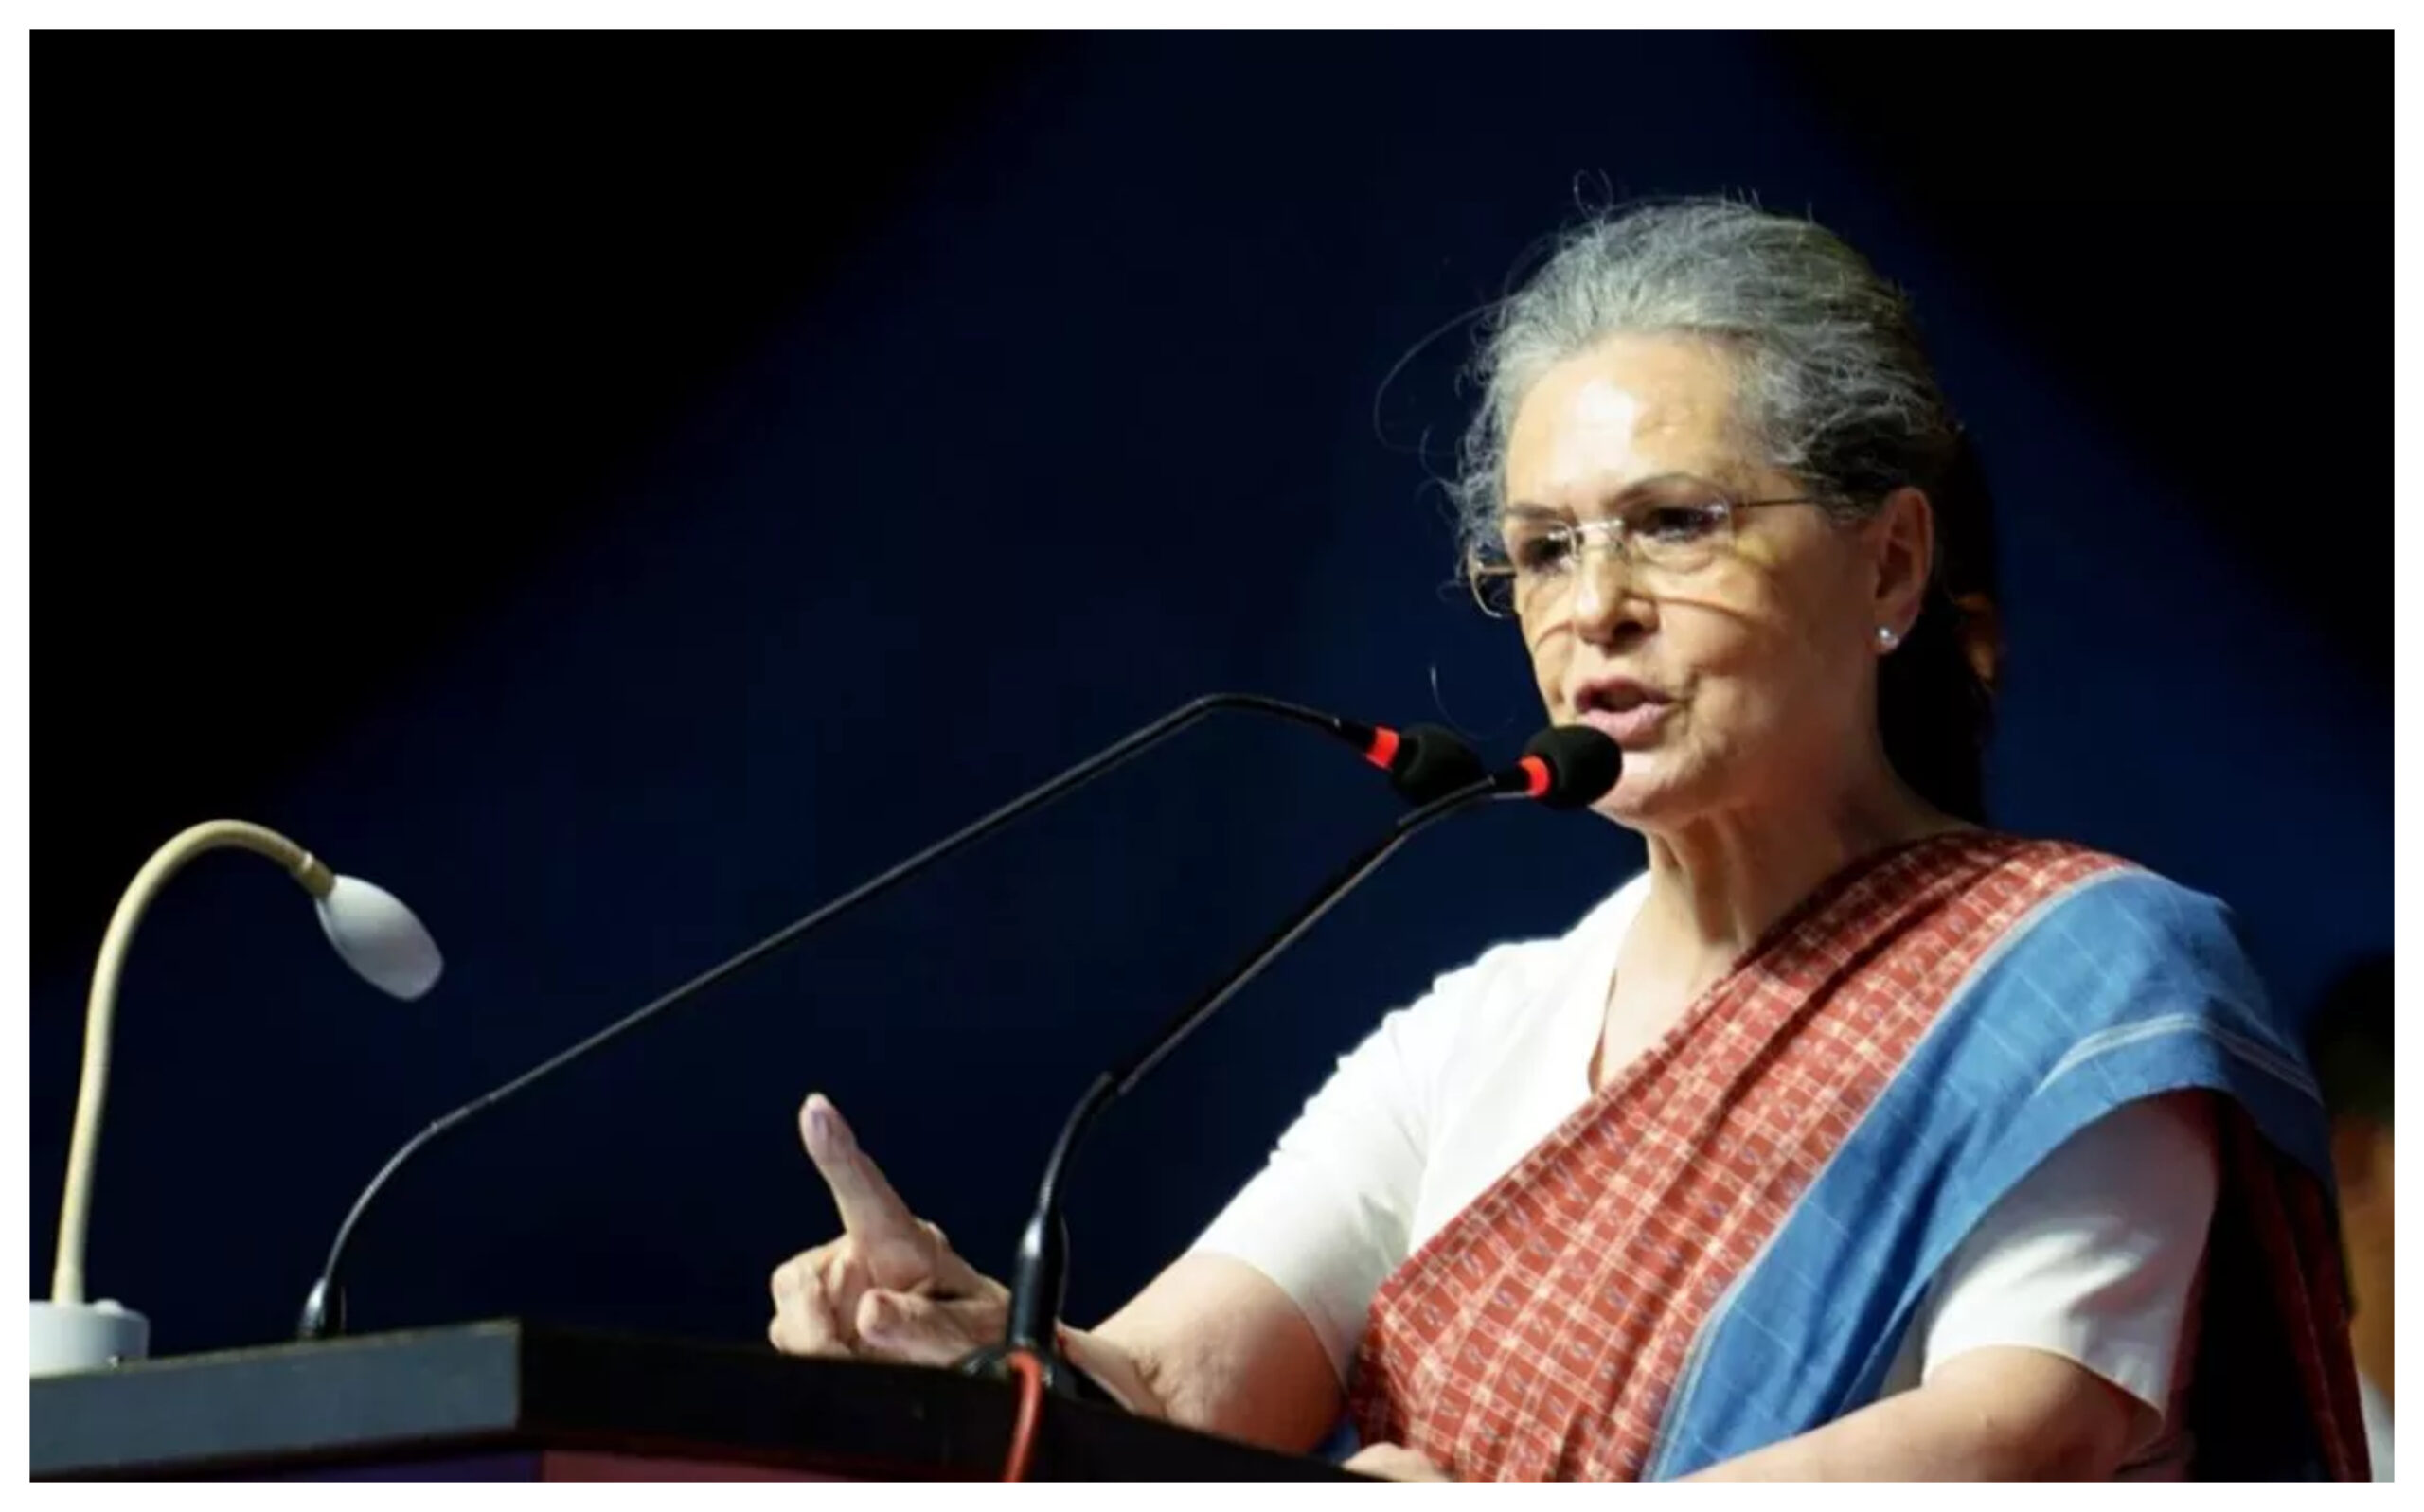 Jaipur: Sonia Gandhi said that a conspiracy is being hatched to change the Constitution, Political news in hindi, Congress, Bjp, Jaipur, Totaltv news in hindi